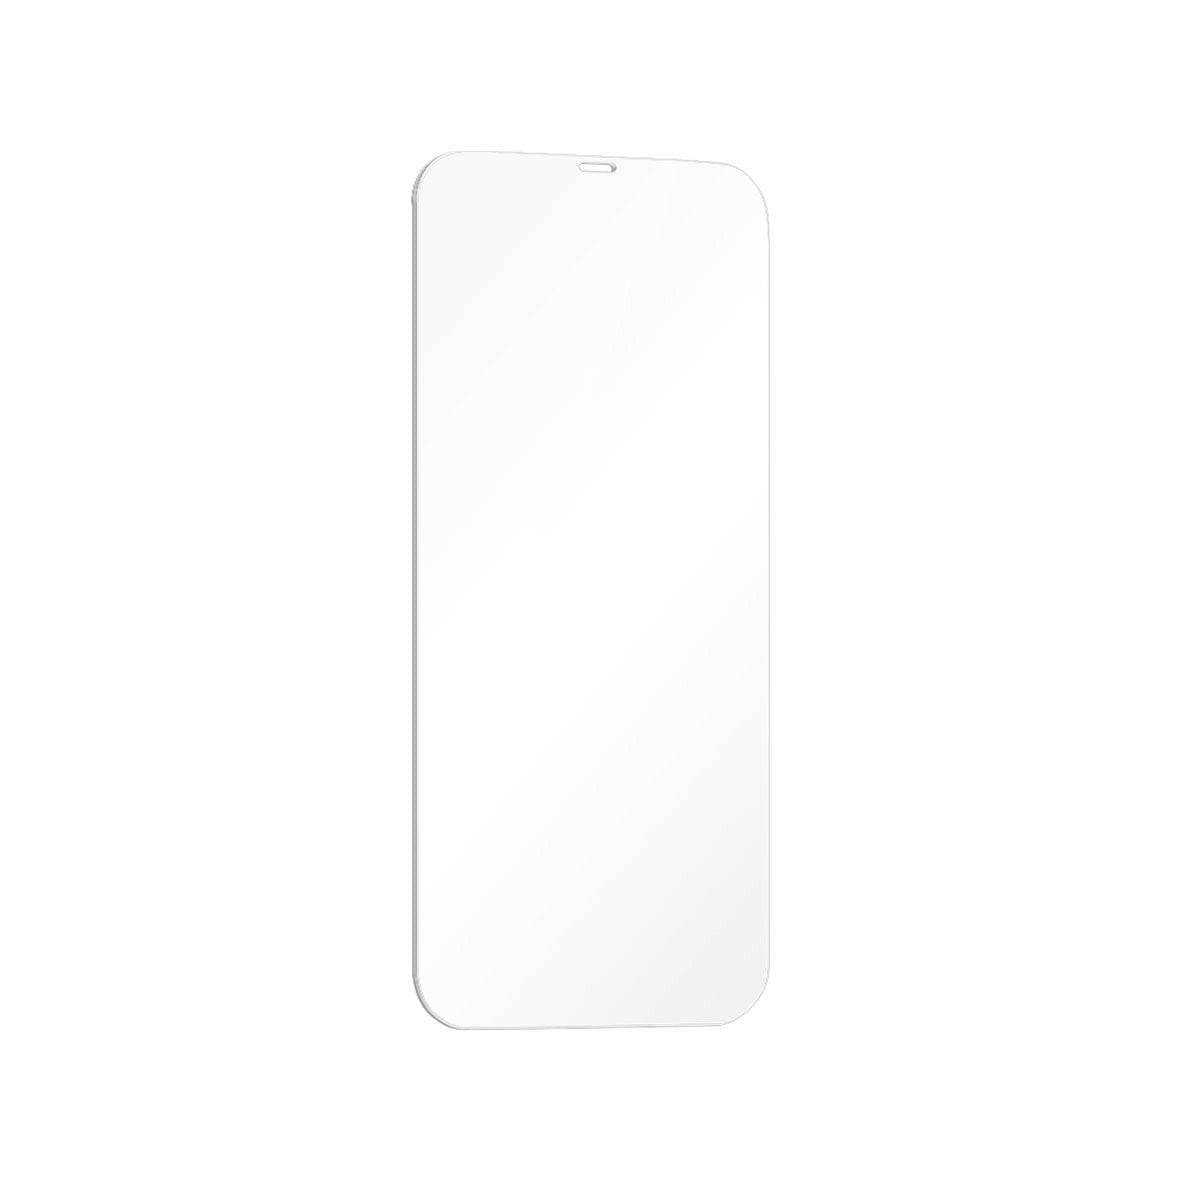 Cleanskin Tempered Glass Screen Guard - For iPhone 12/12 Pro 6.1" Clear-Screen Guards - Mobile Devices-CLEANSKIN-www.PhoneGuy.com.au